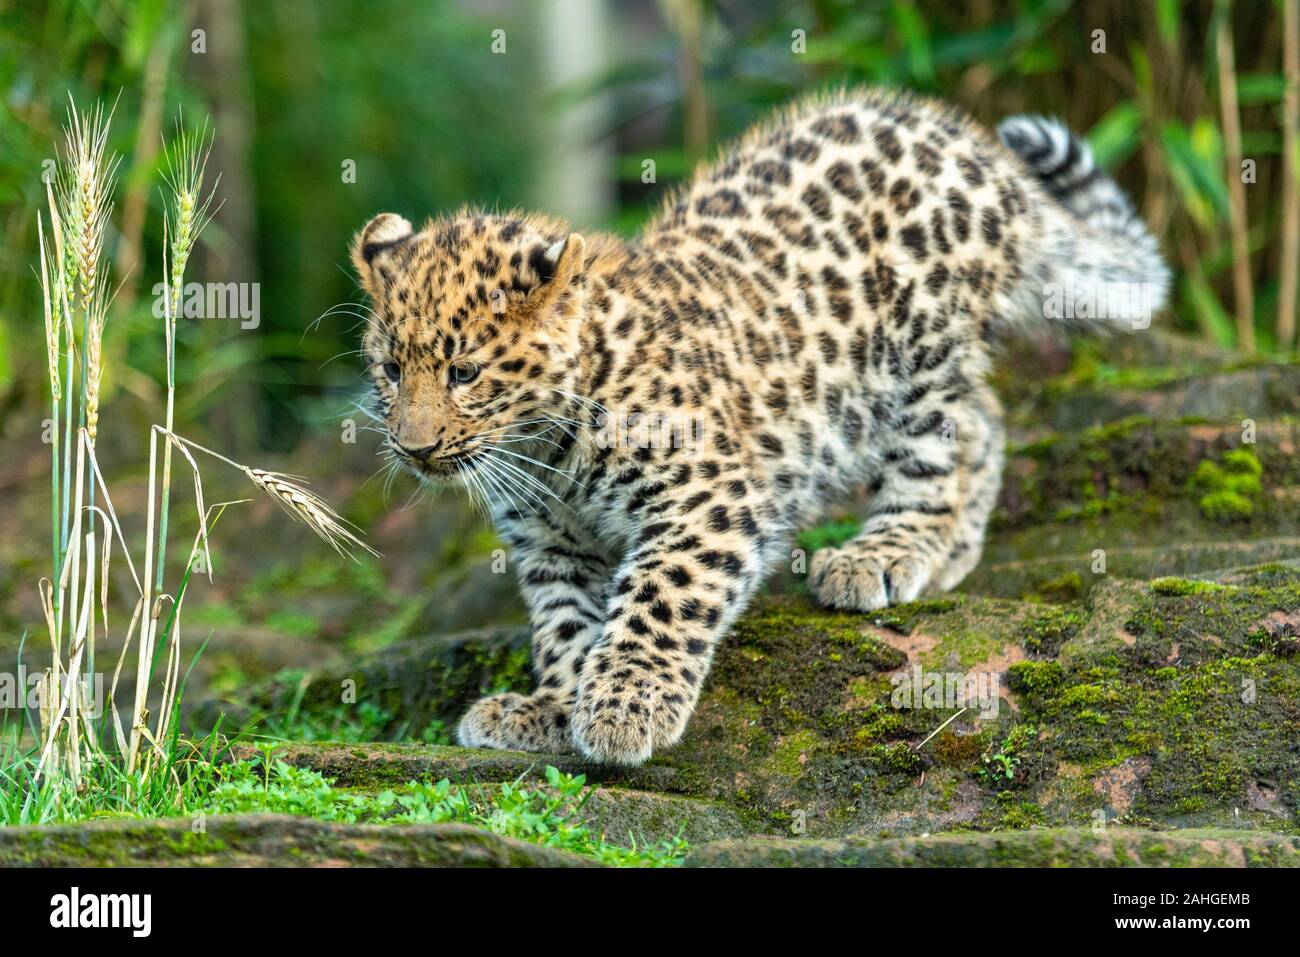 Amur Leopard young cub in captivity. Three month old Panthera pardus orientalis at Colchester Zoo, Essex, UK. Endangered specie born in captivity Stock Photo